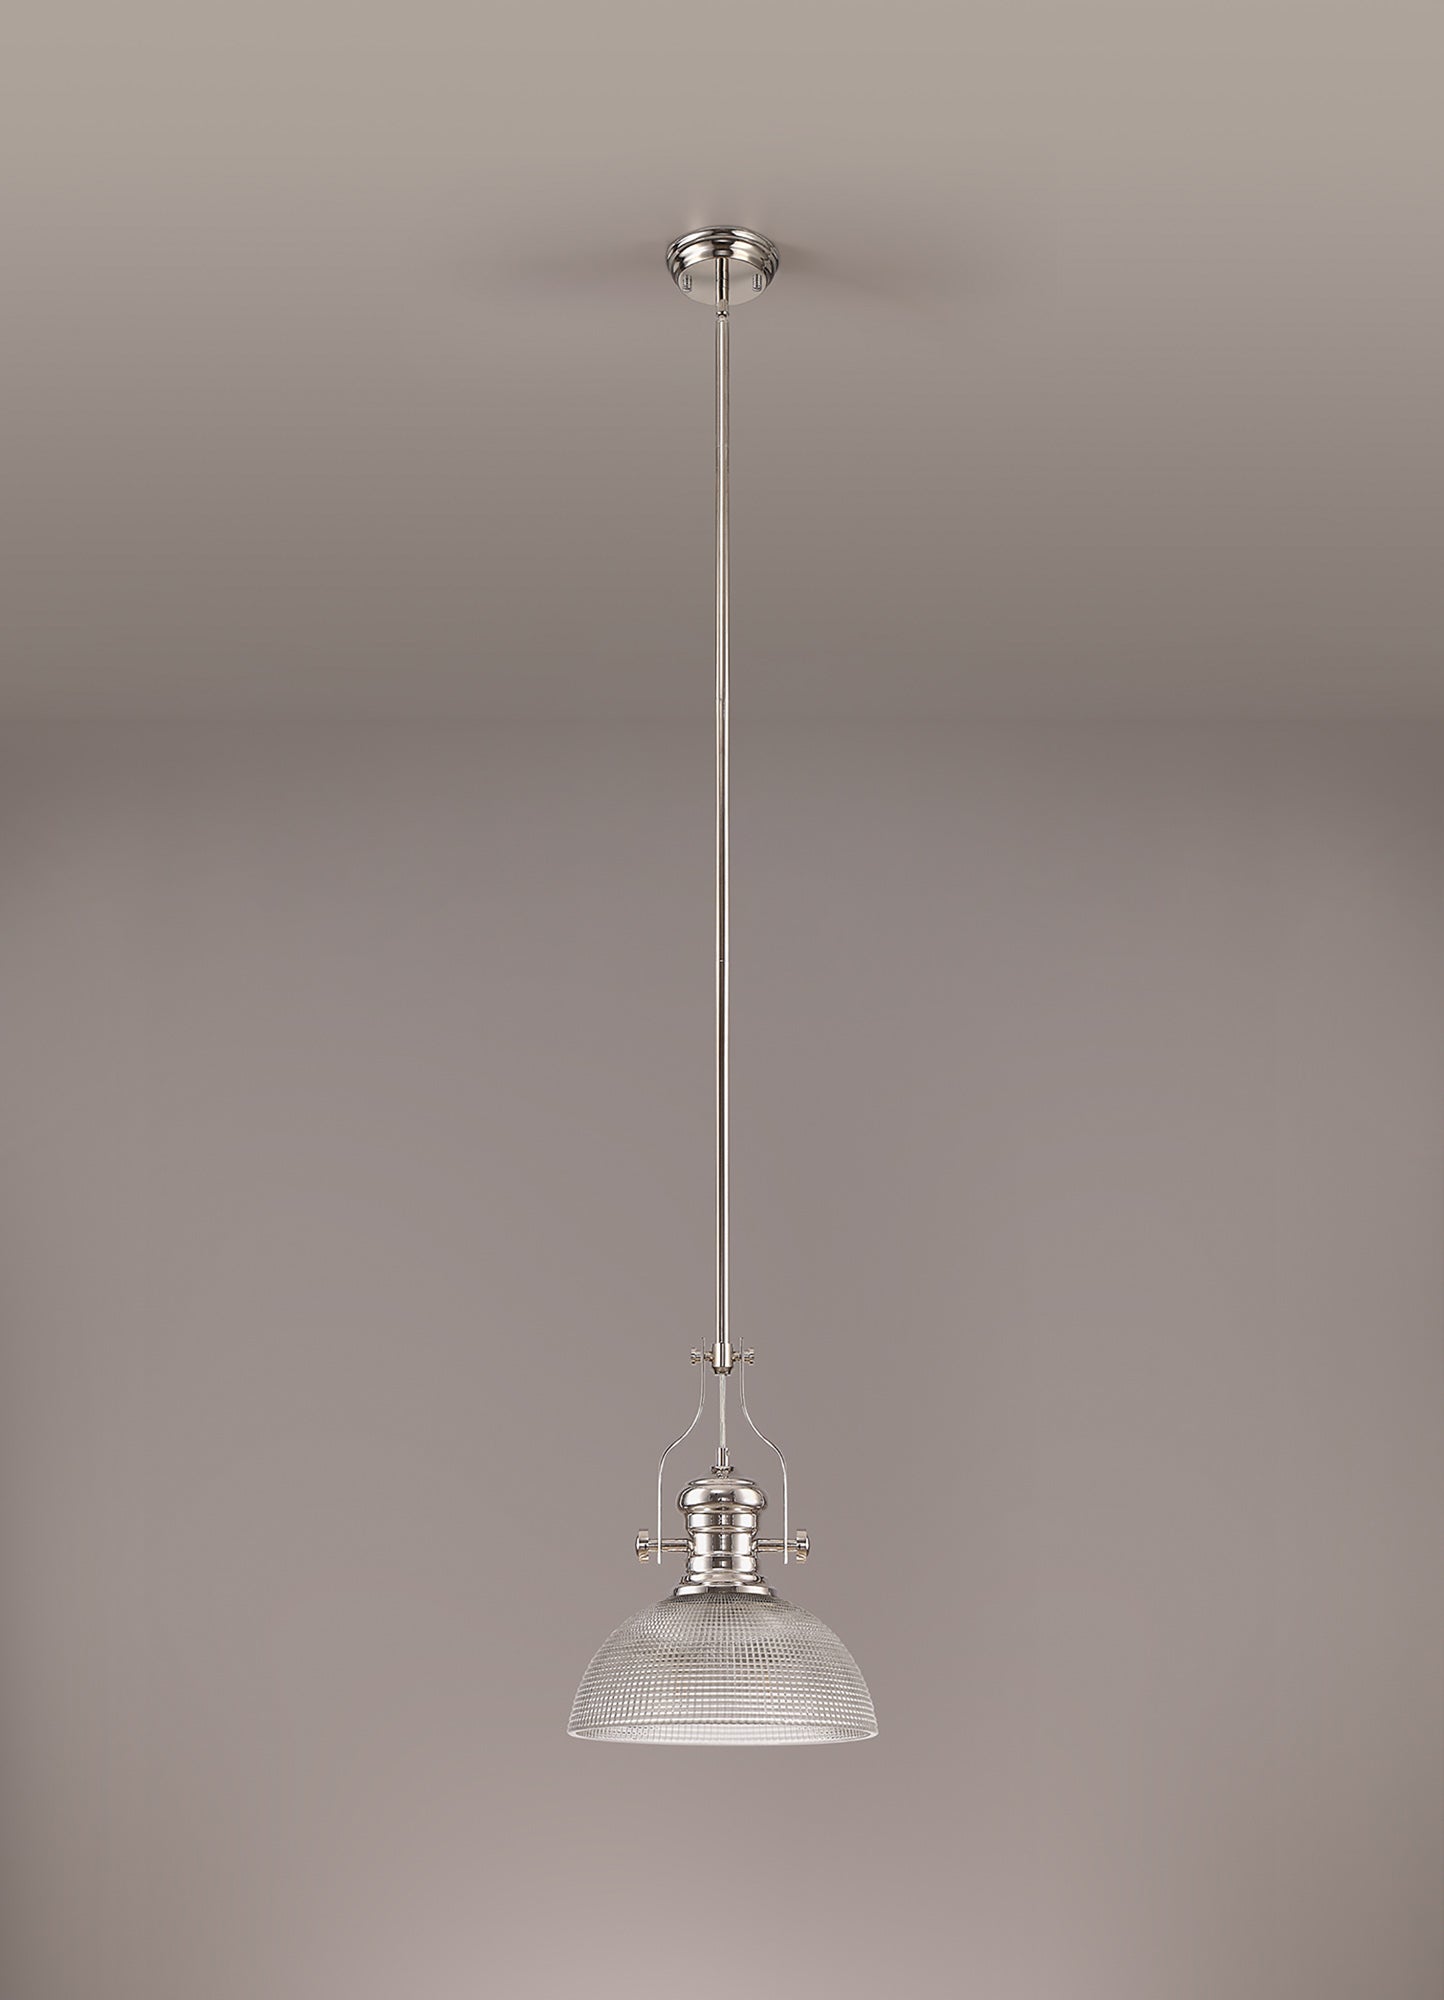 Docker 1 Light Pendant E27 With 30cm Prismatic Glass Shade, Polished Nickel/Clear